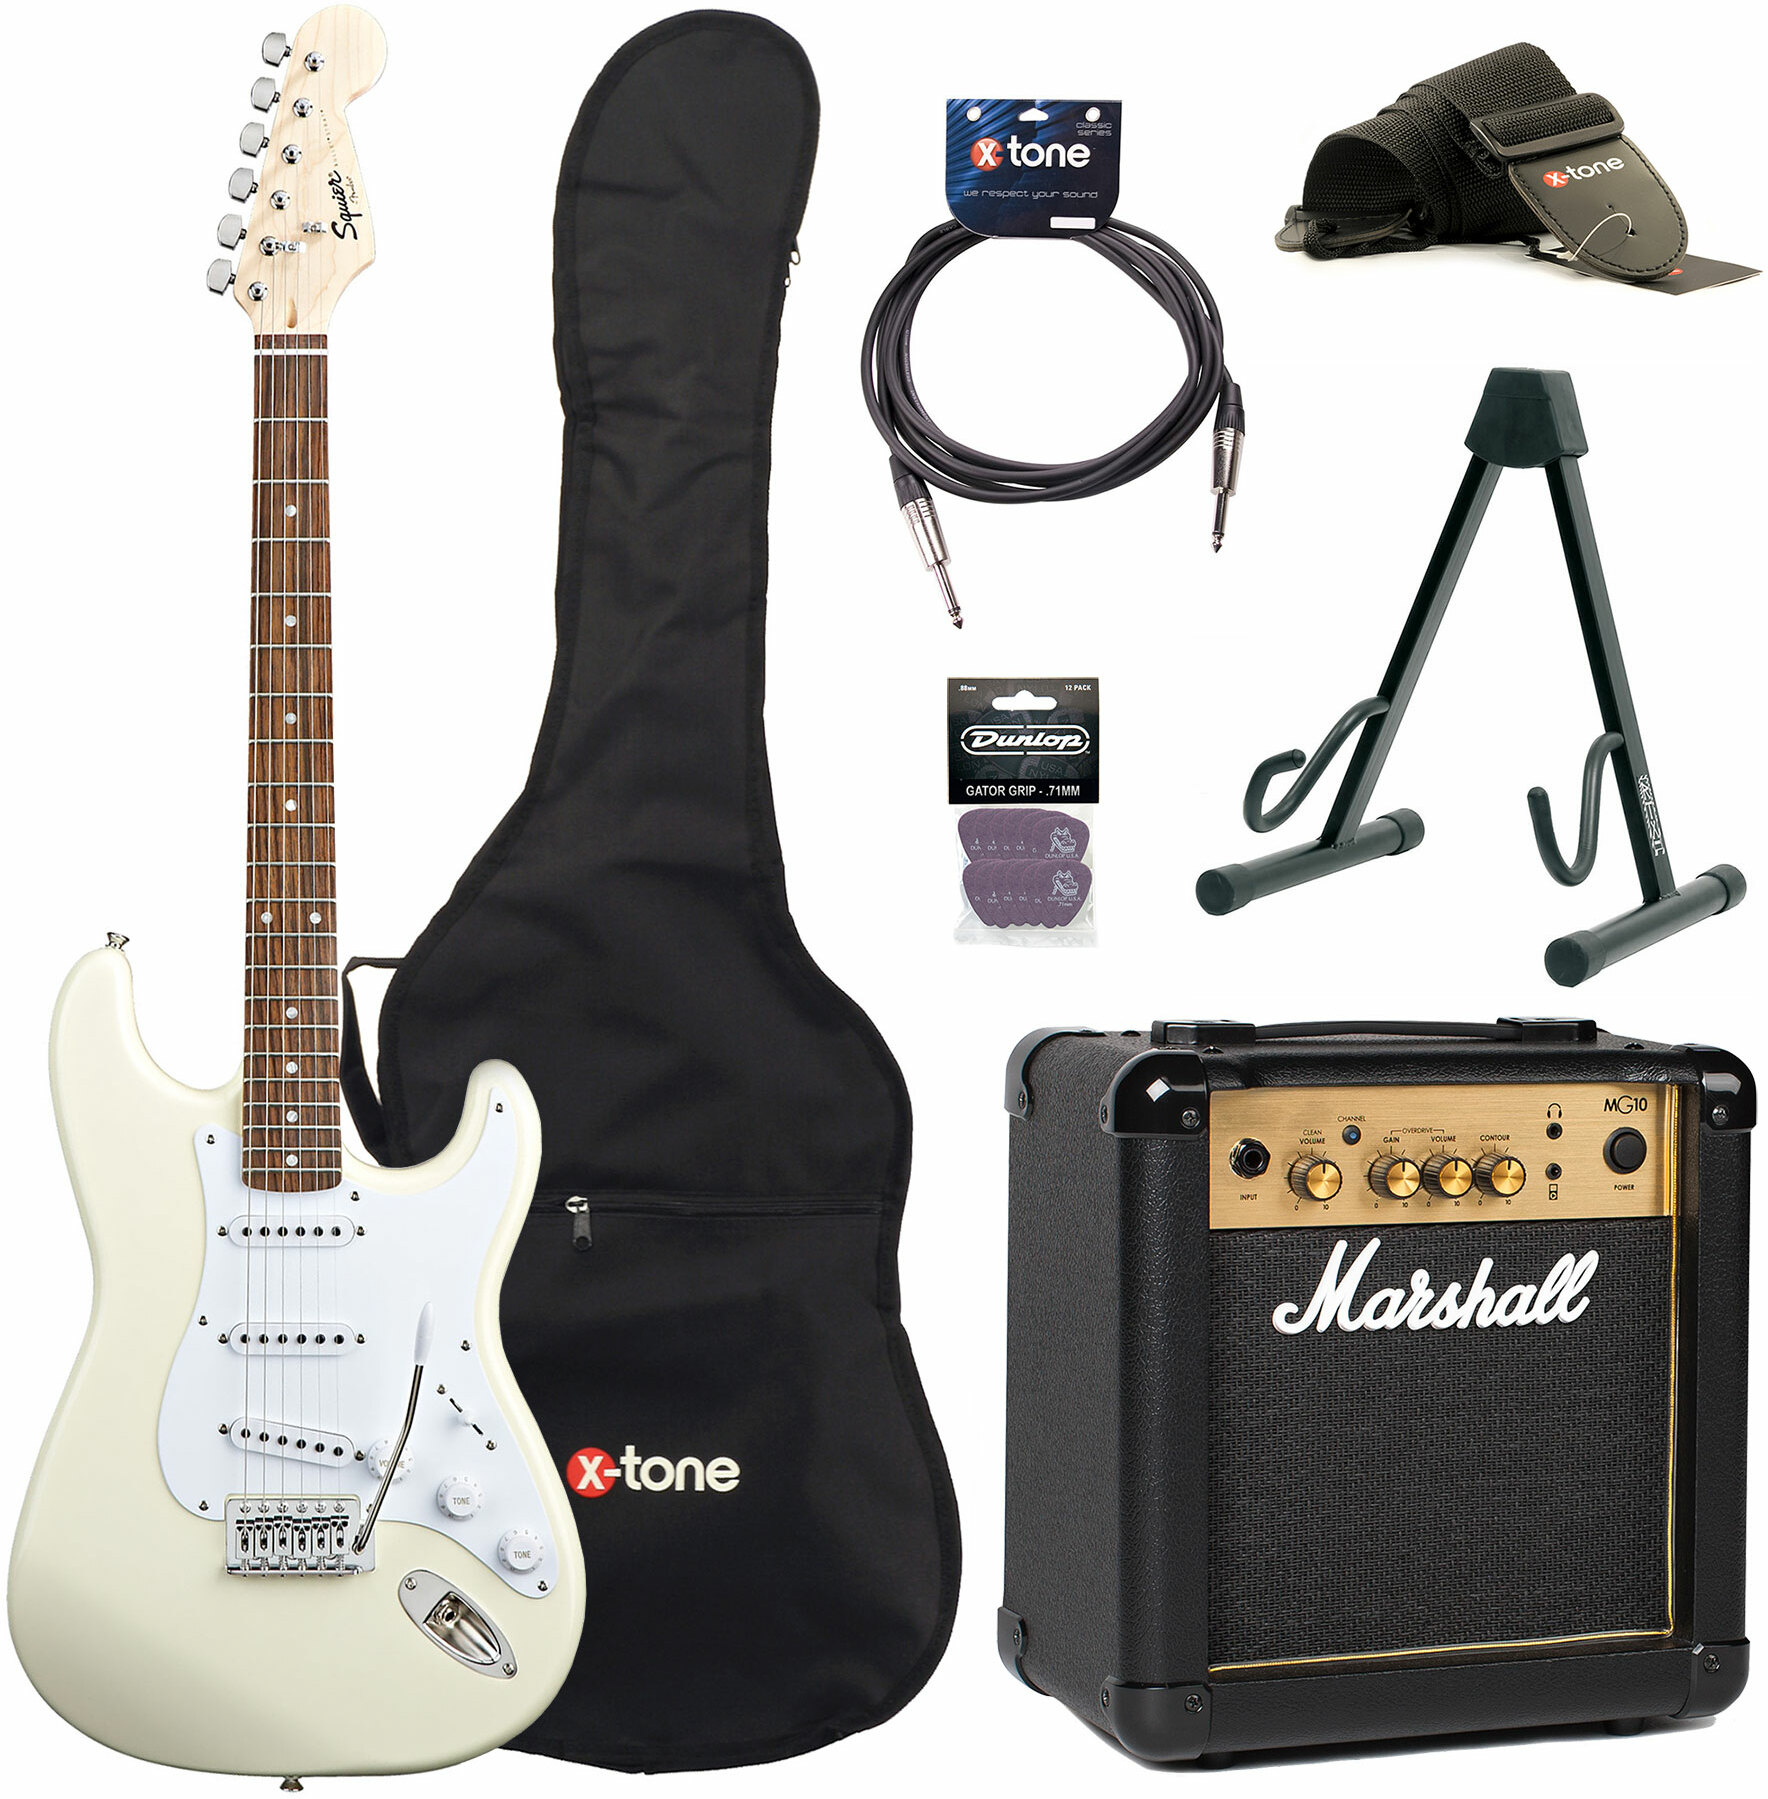 Squier Strat Bullet Sss + Marshall Mg10g + Access X-tone - Arctic White - Pack Guitare Électrique - Main picture